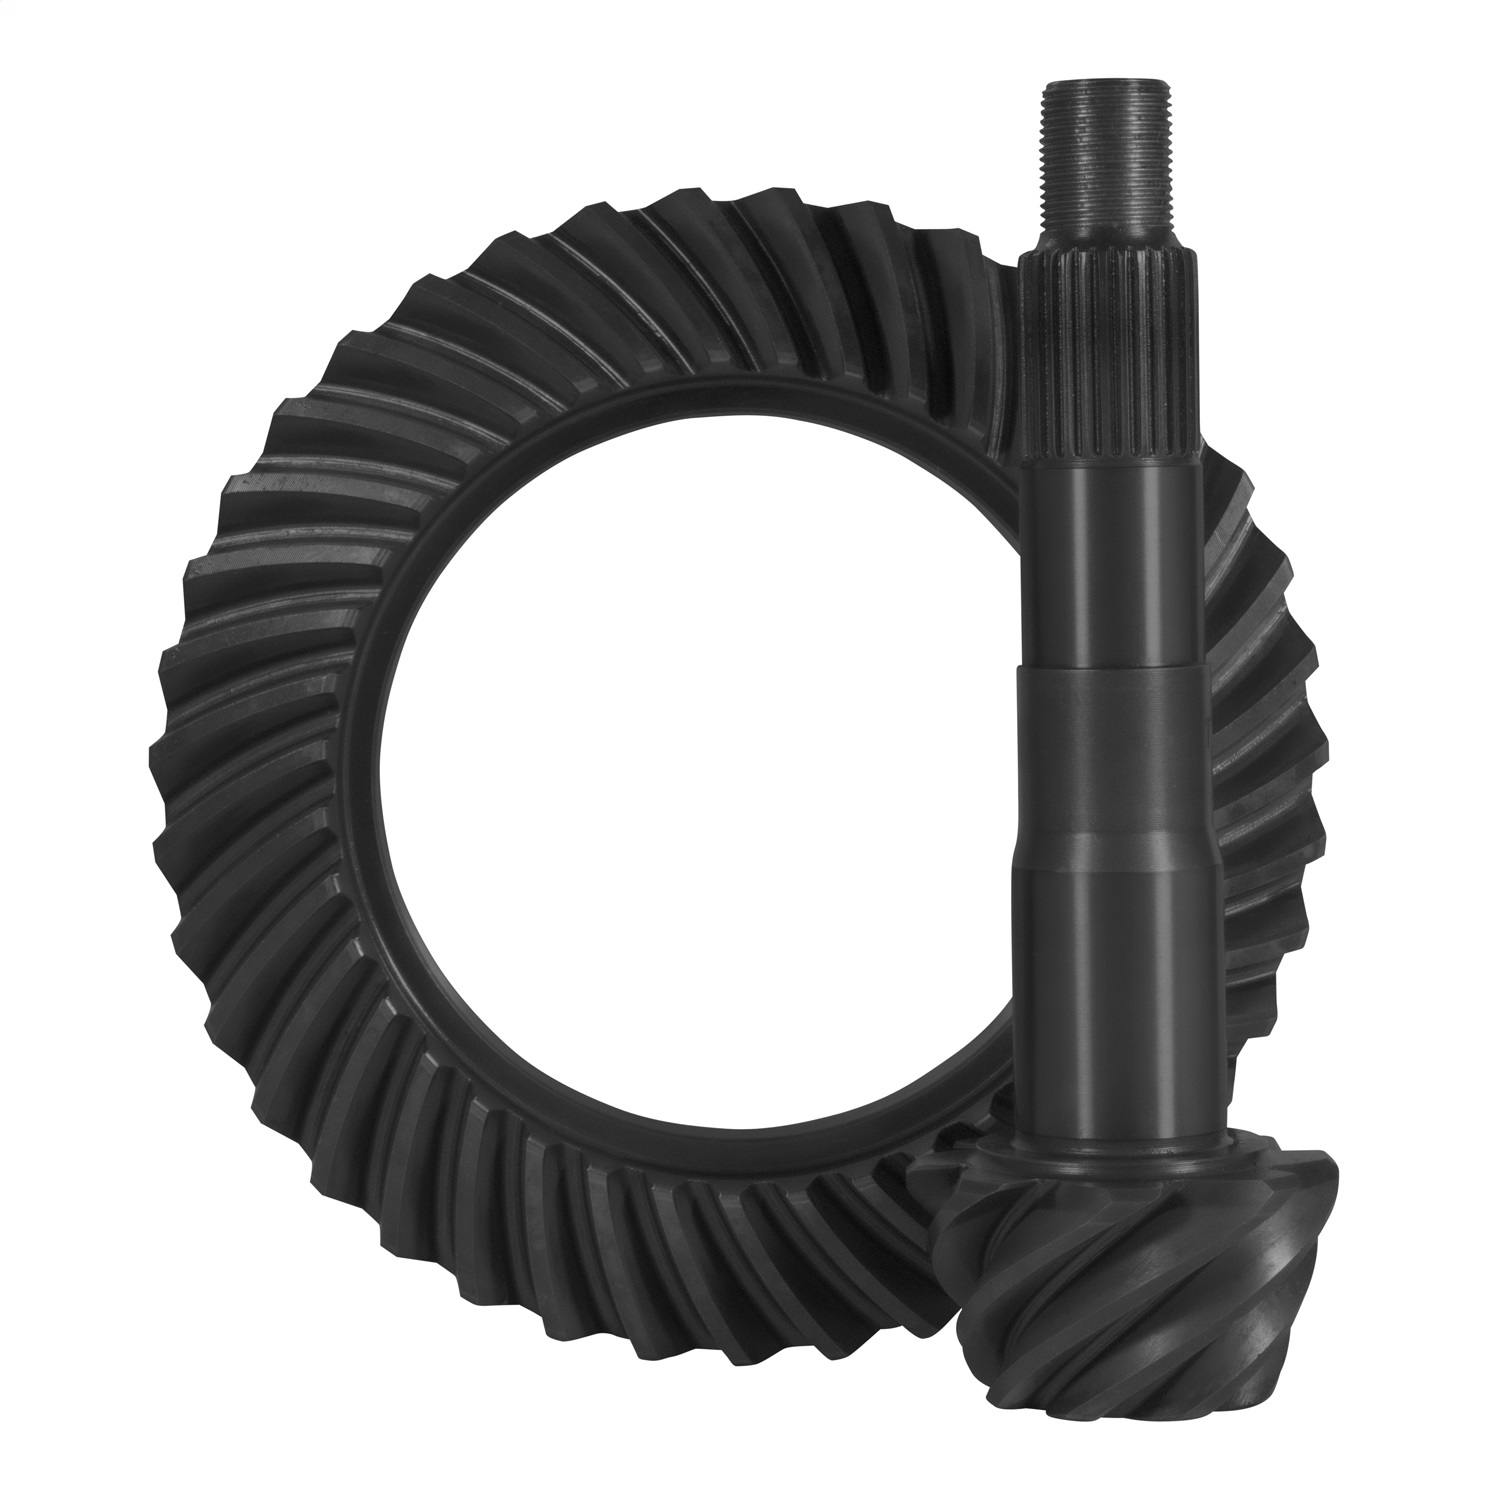 USA Standard Gear ZG TLCF-430R-29 Differential Ring and Pinion